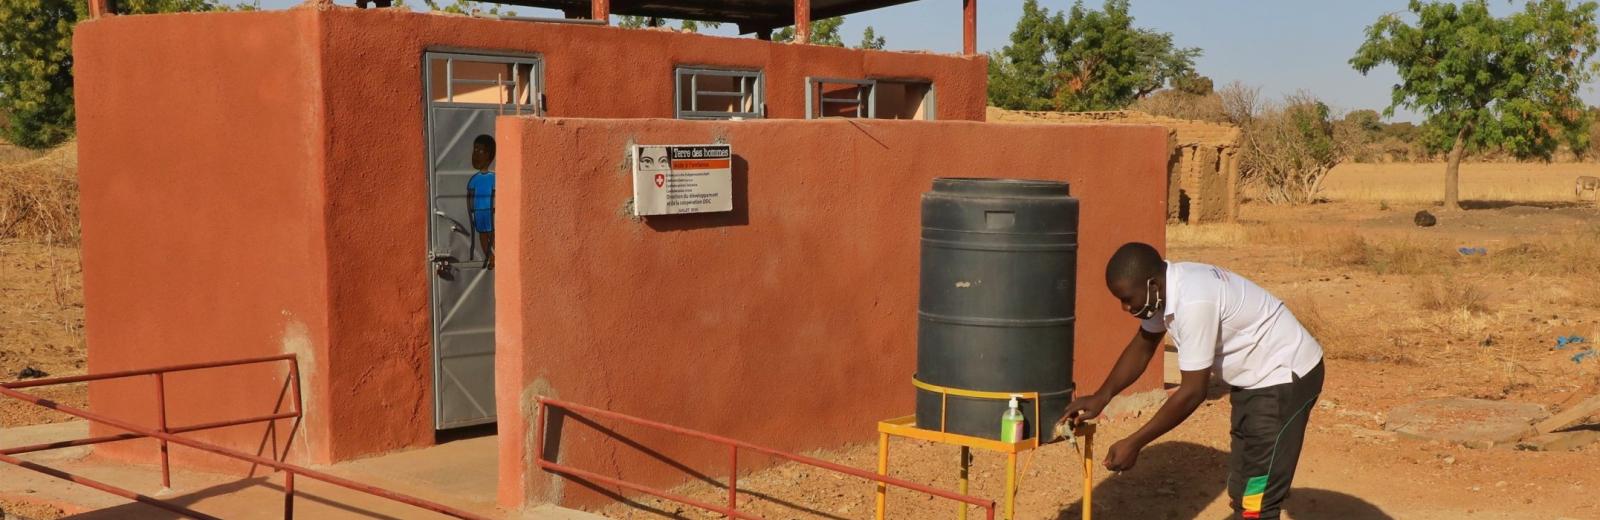 The Swiss consortium for water and sanitation strives to provide dignified sanitation infrastructures adapted to the mobility of everyone in Mali © Terre des hommes